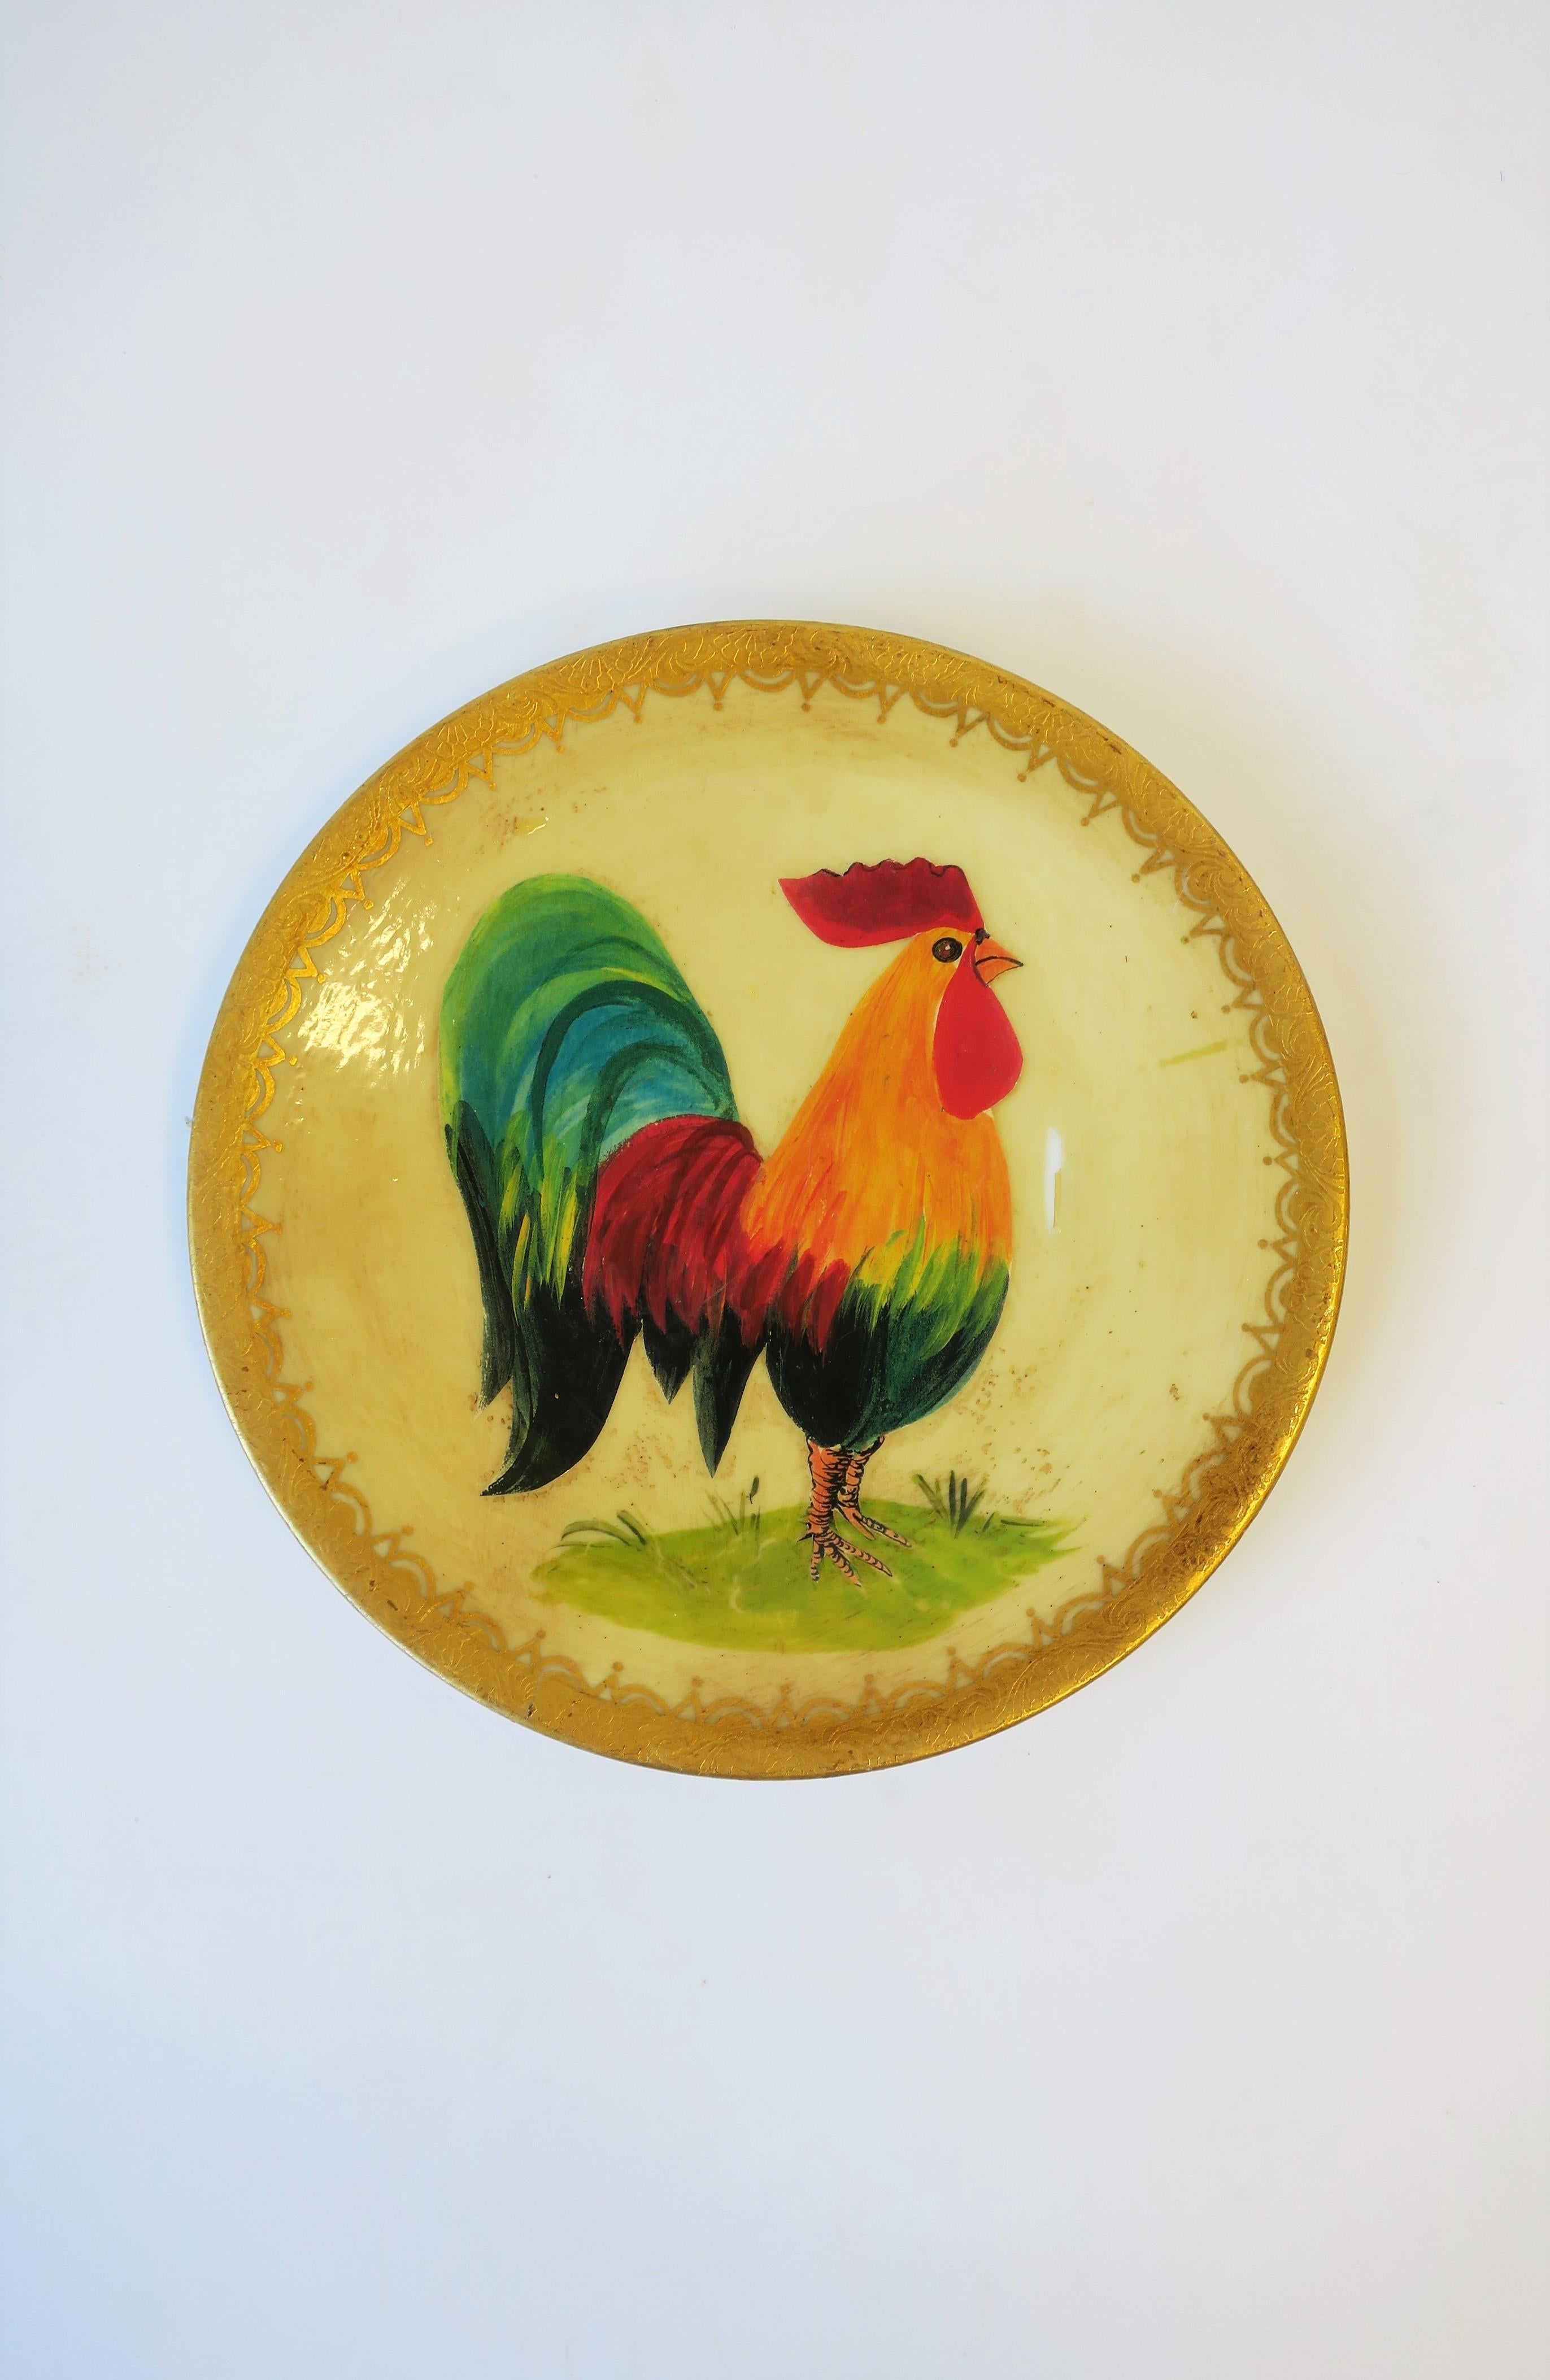 Rustic French Porcelain Rooster Bird Painting Wall Plate, Signed 